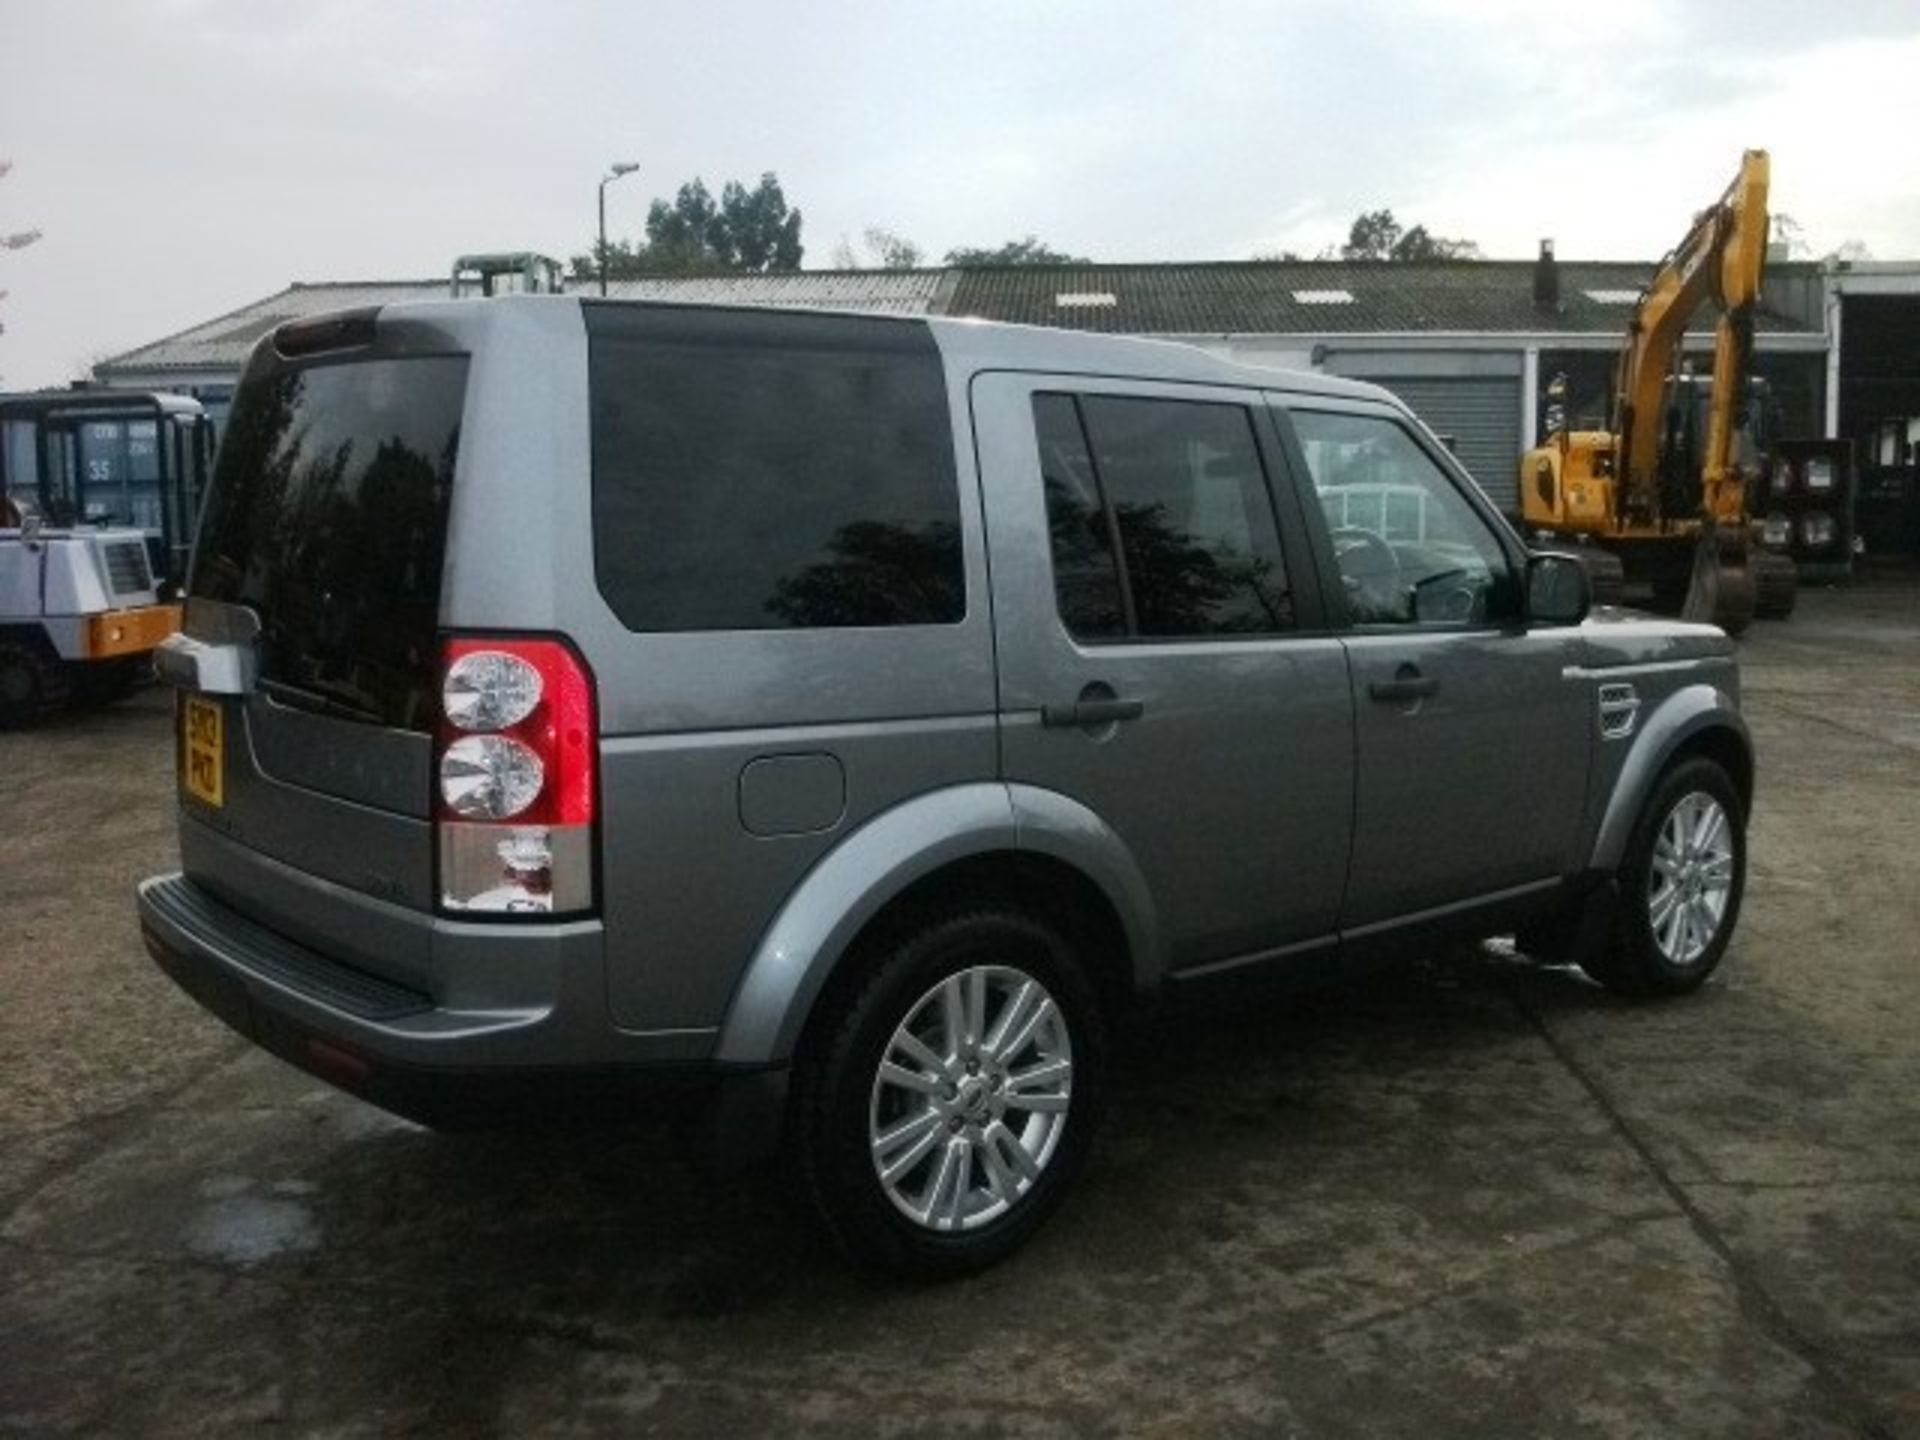 LAND ROVER DISCOVERY SDV6 AUTO 255 - 2993cc
Body: 4 Dr 4x4
Color: Grey
First Reg: 26/04/2013 - Image 26 of 29